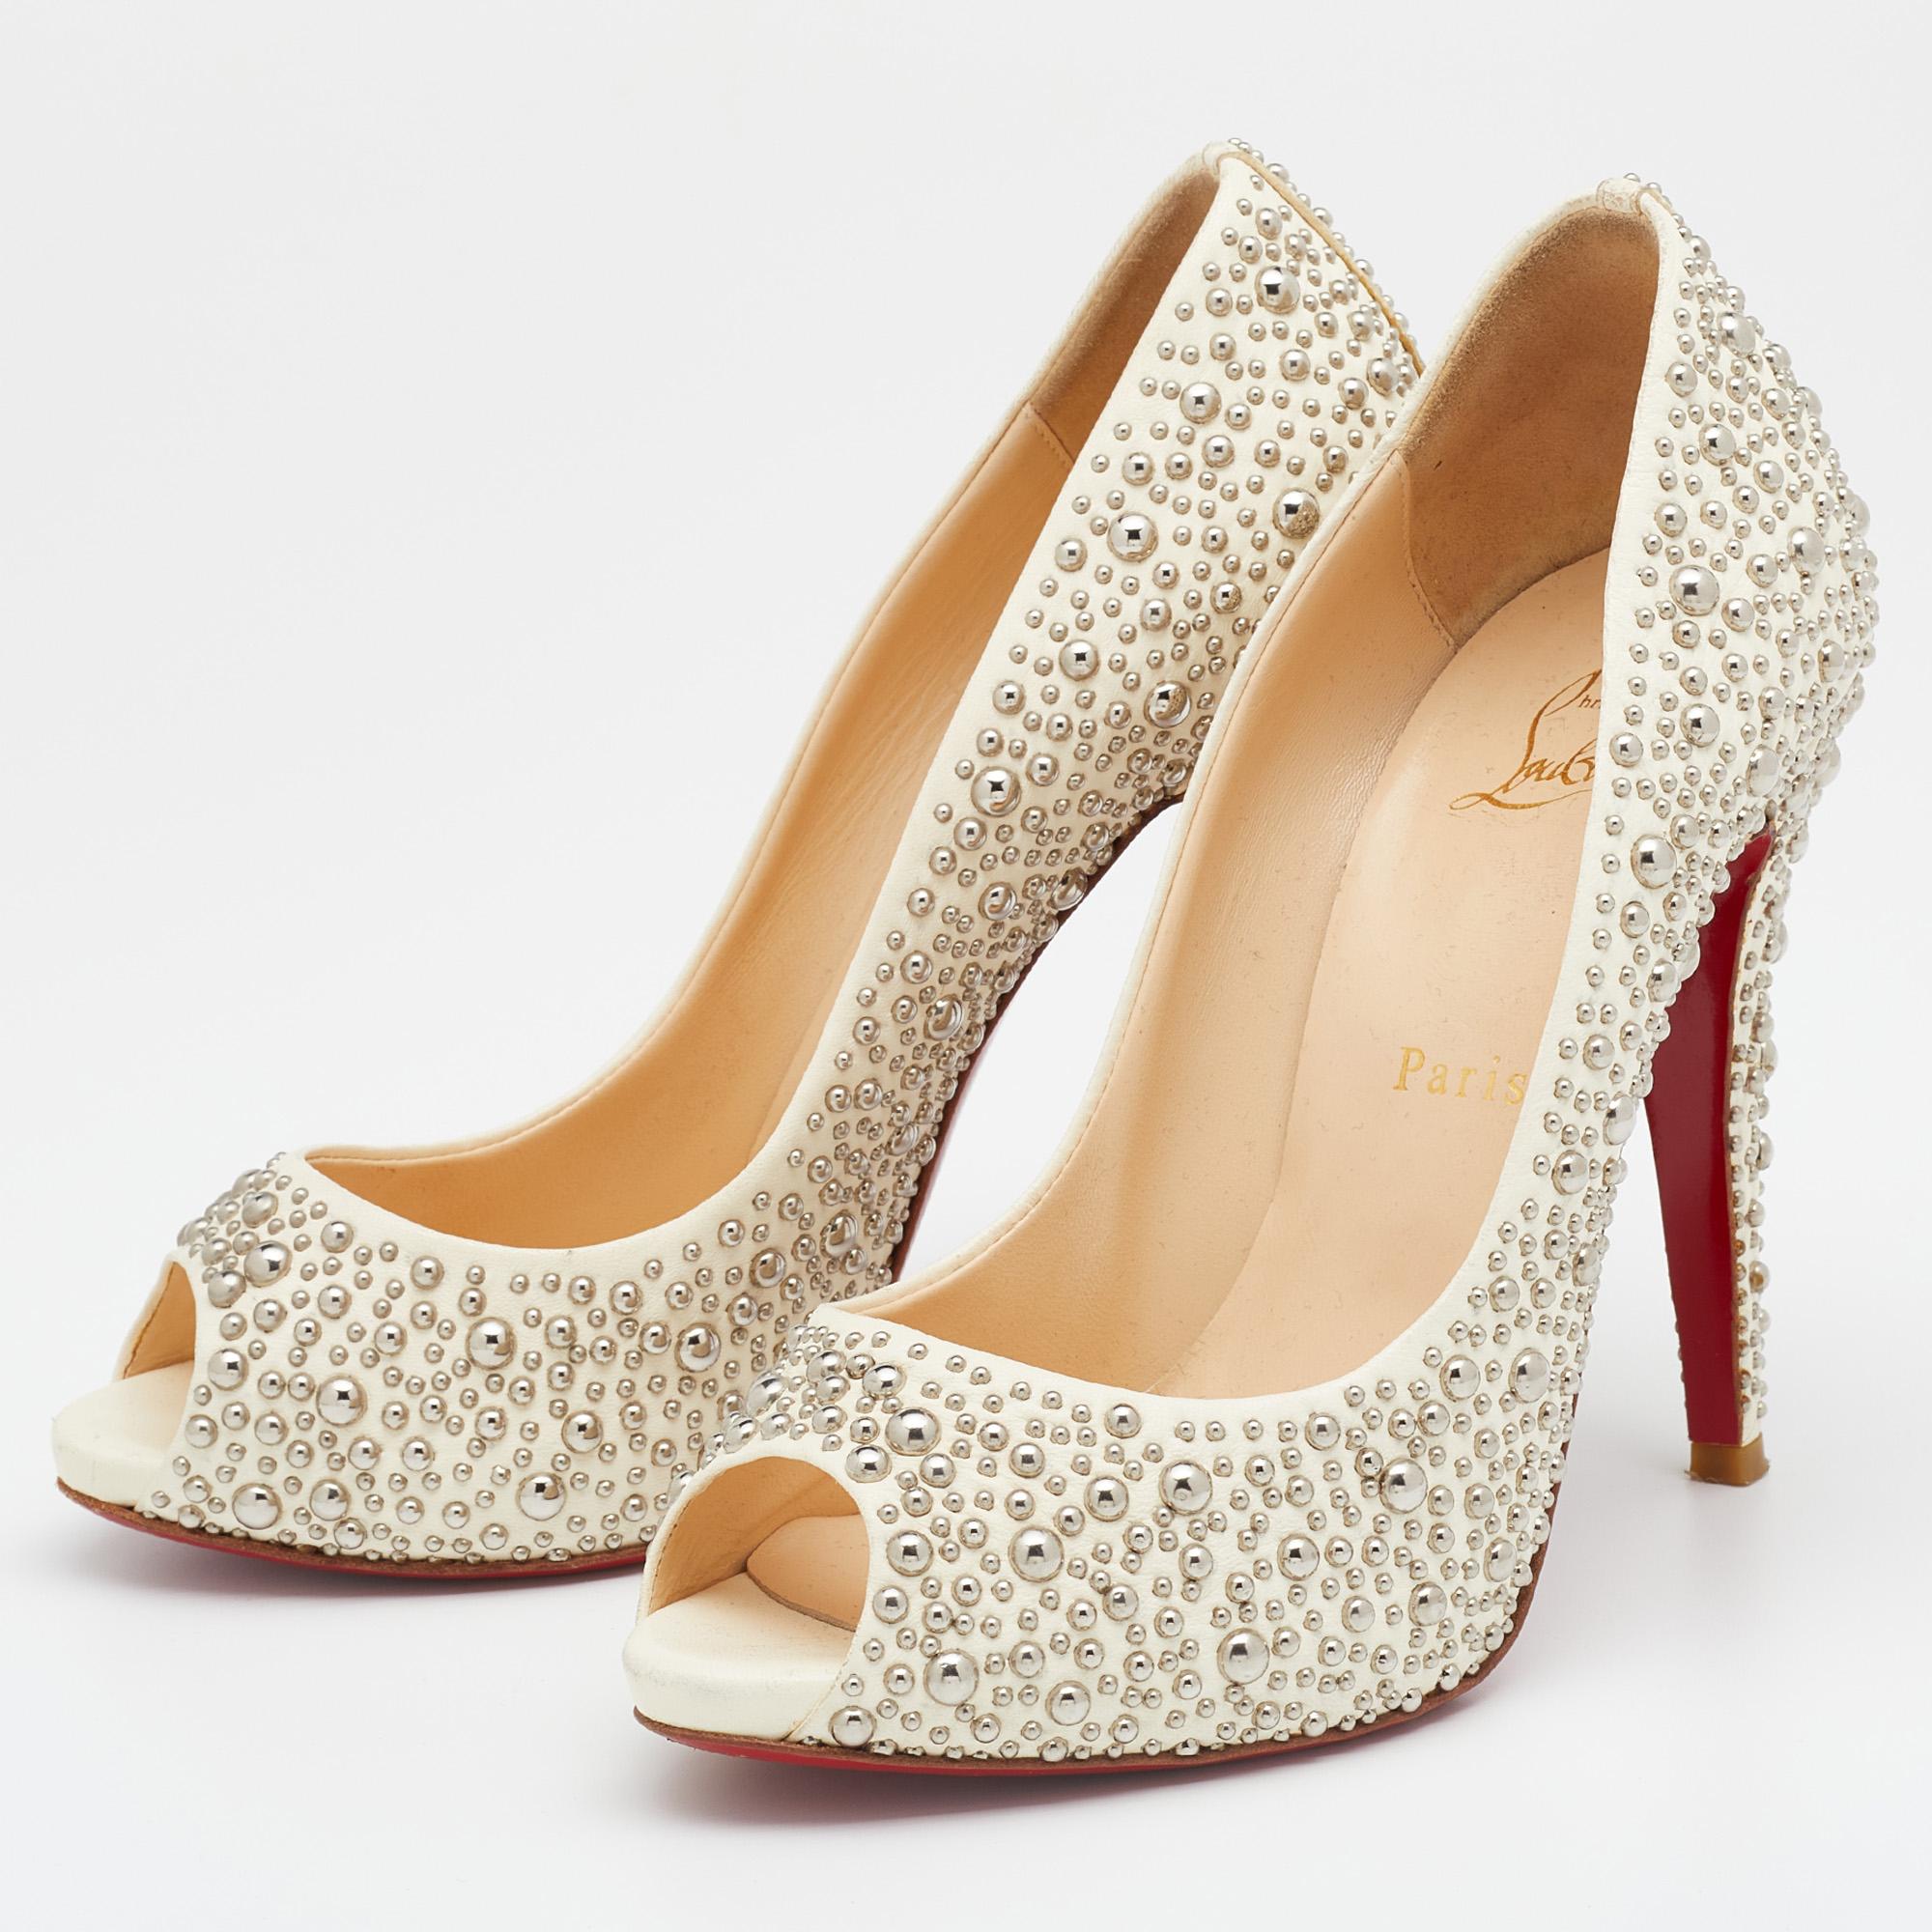 Covered in studs, these authentic Christian Louboutin pumps are meant to add a sophisticated finish to your look of the day. The designer pumps feature peep toes, leather lining, and 12 cm heels.

